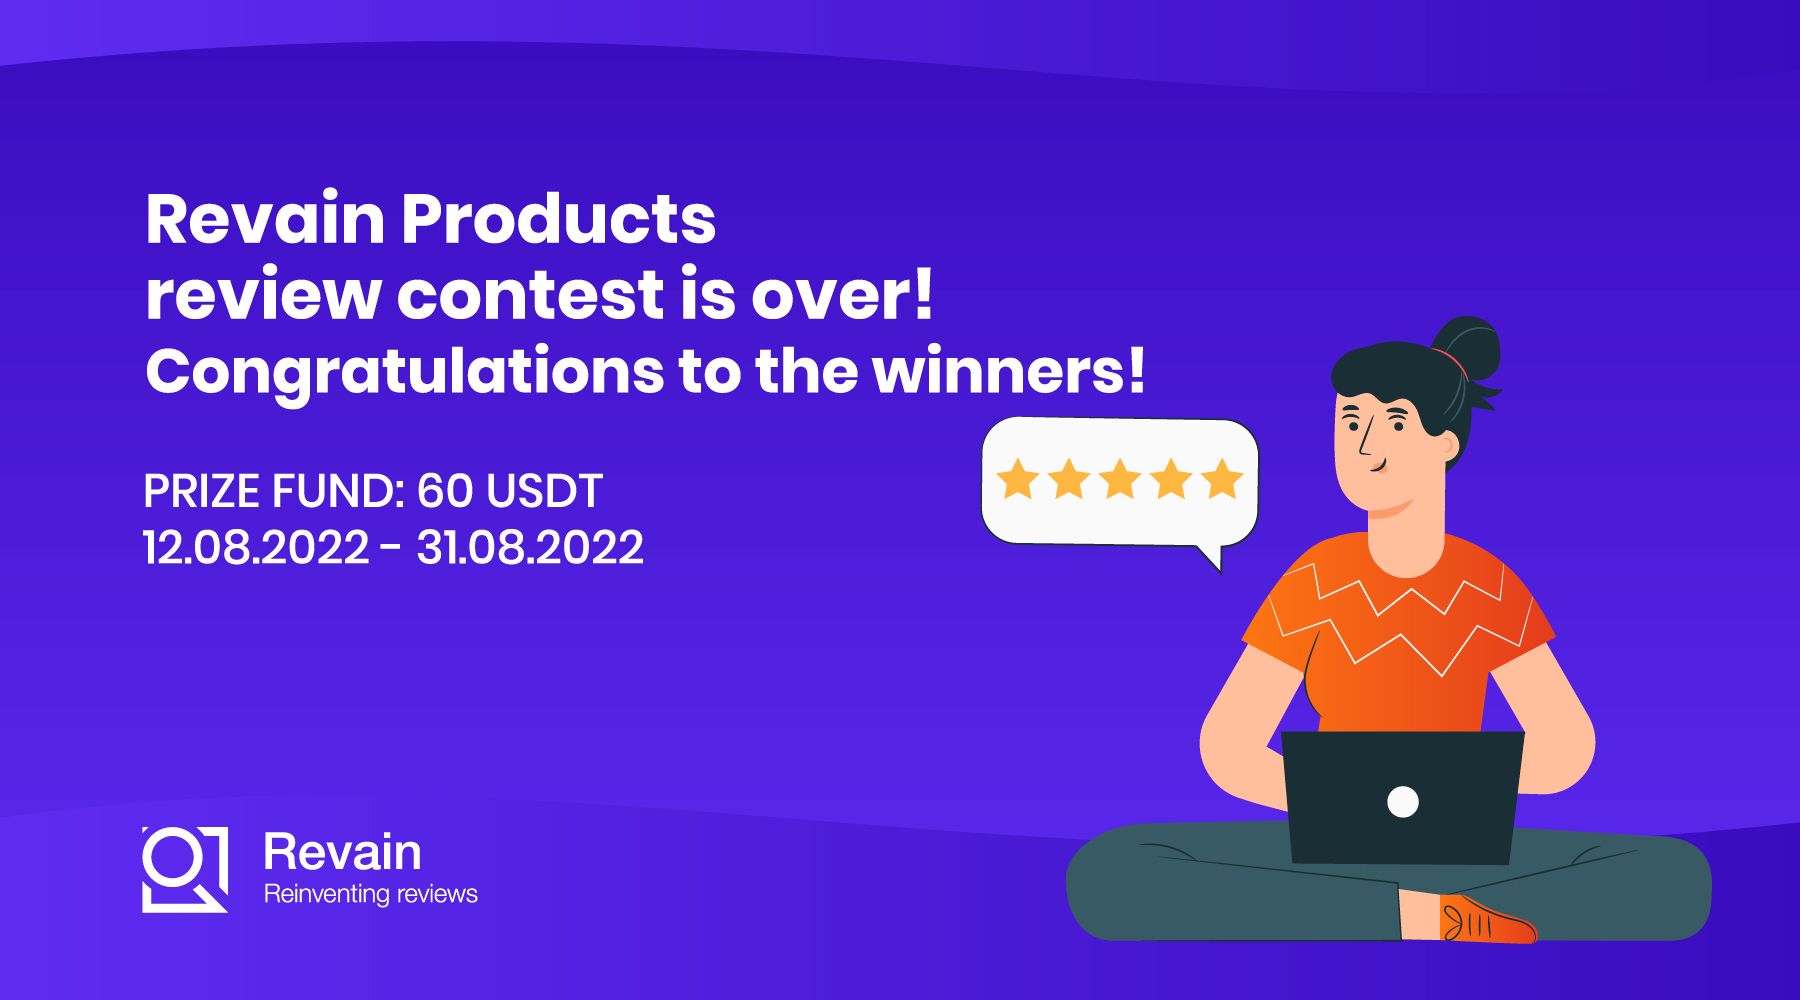 Article Revain Products review contest is over!